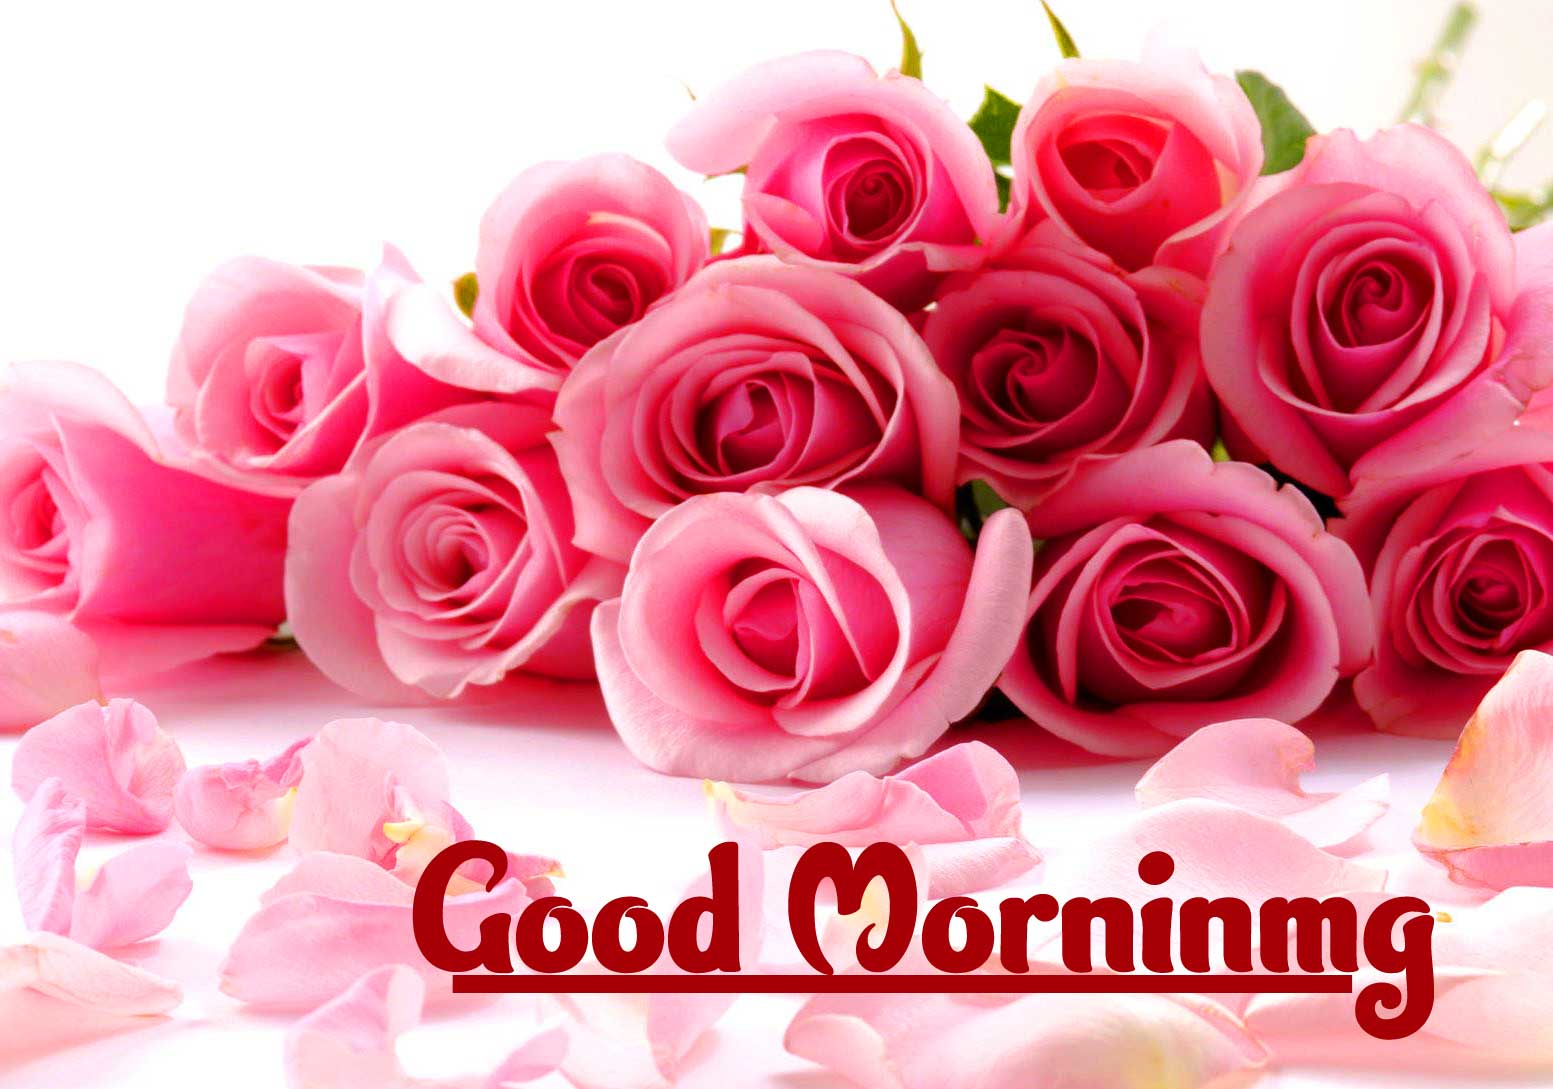 Good Morning Wishes Images Wallpaper Free Download 